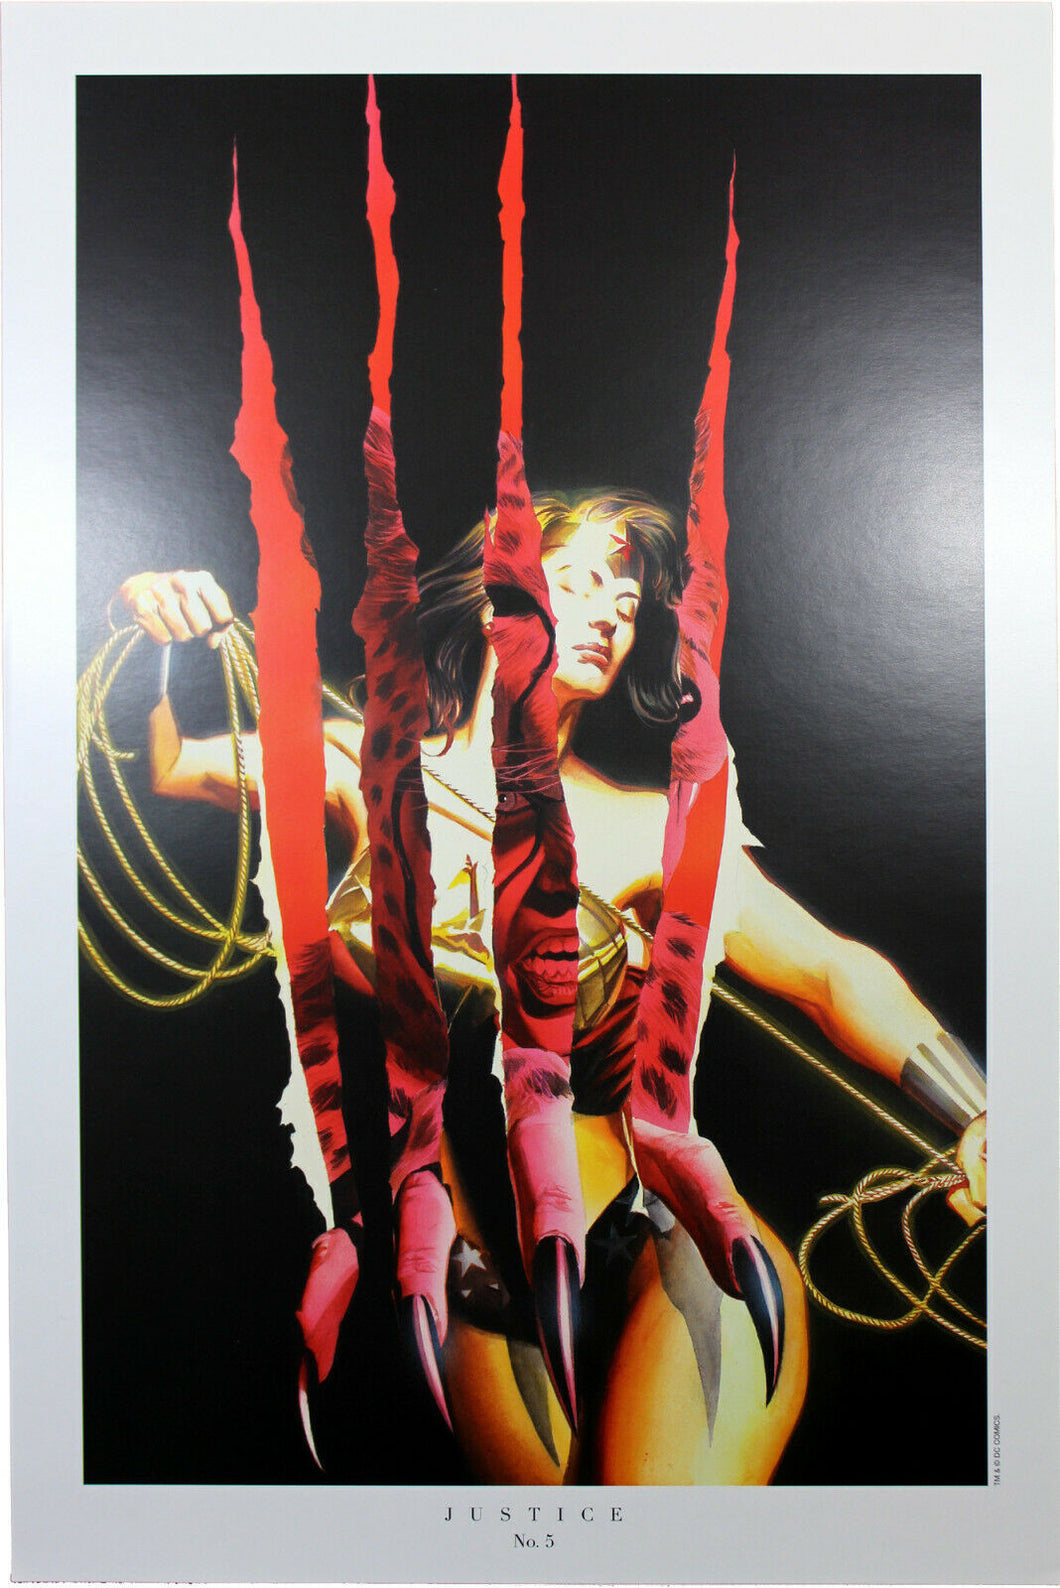 JUSTICE #5 ART PRINT by Alex Ross ~ 9